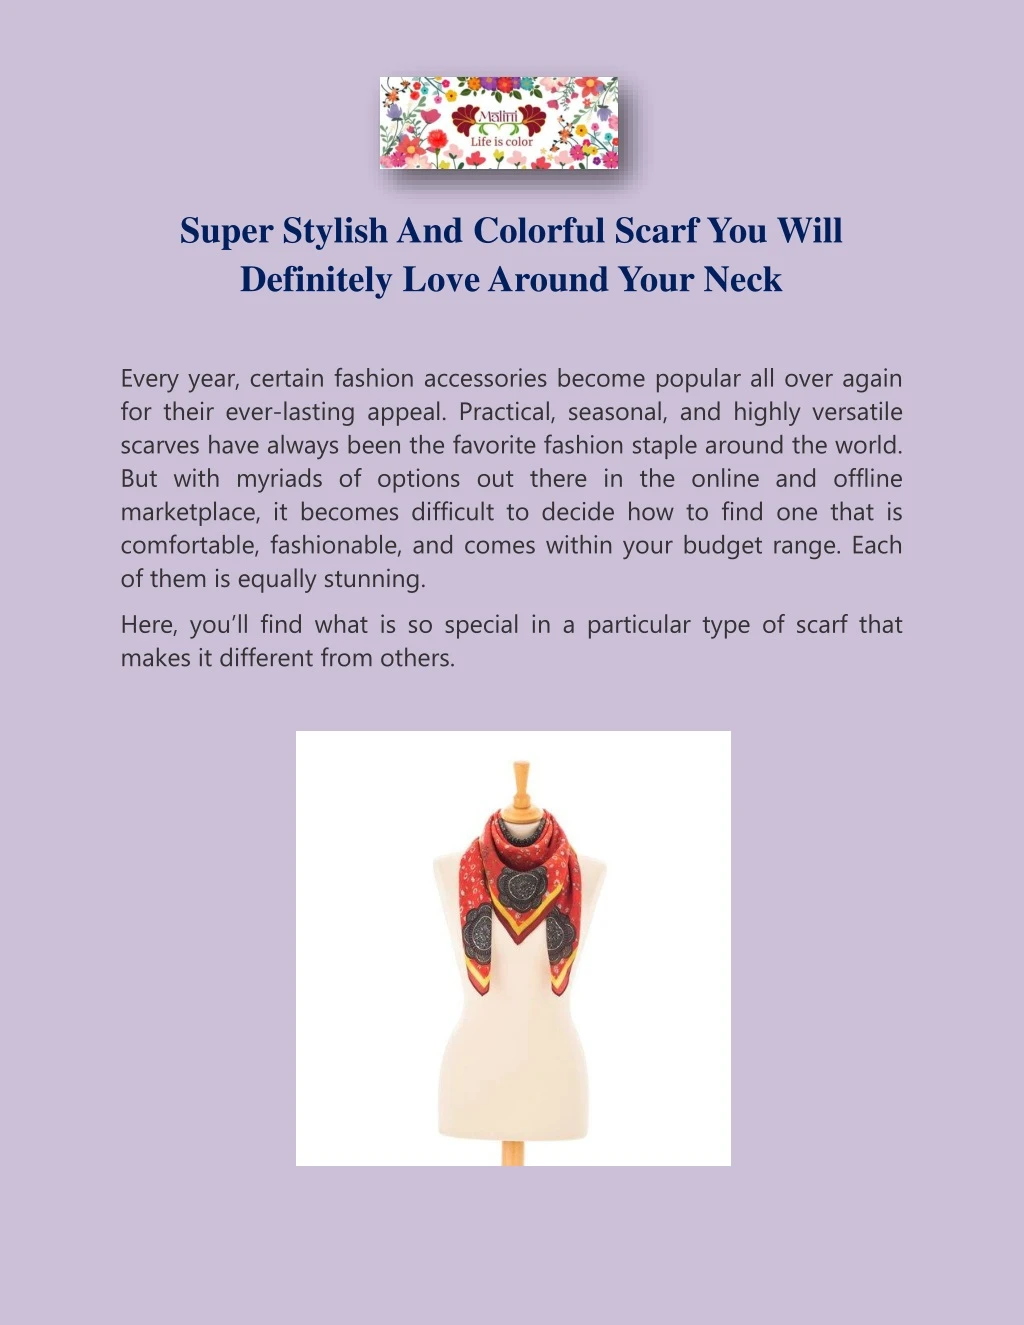 super stylish and colorful scarf you will